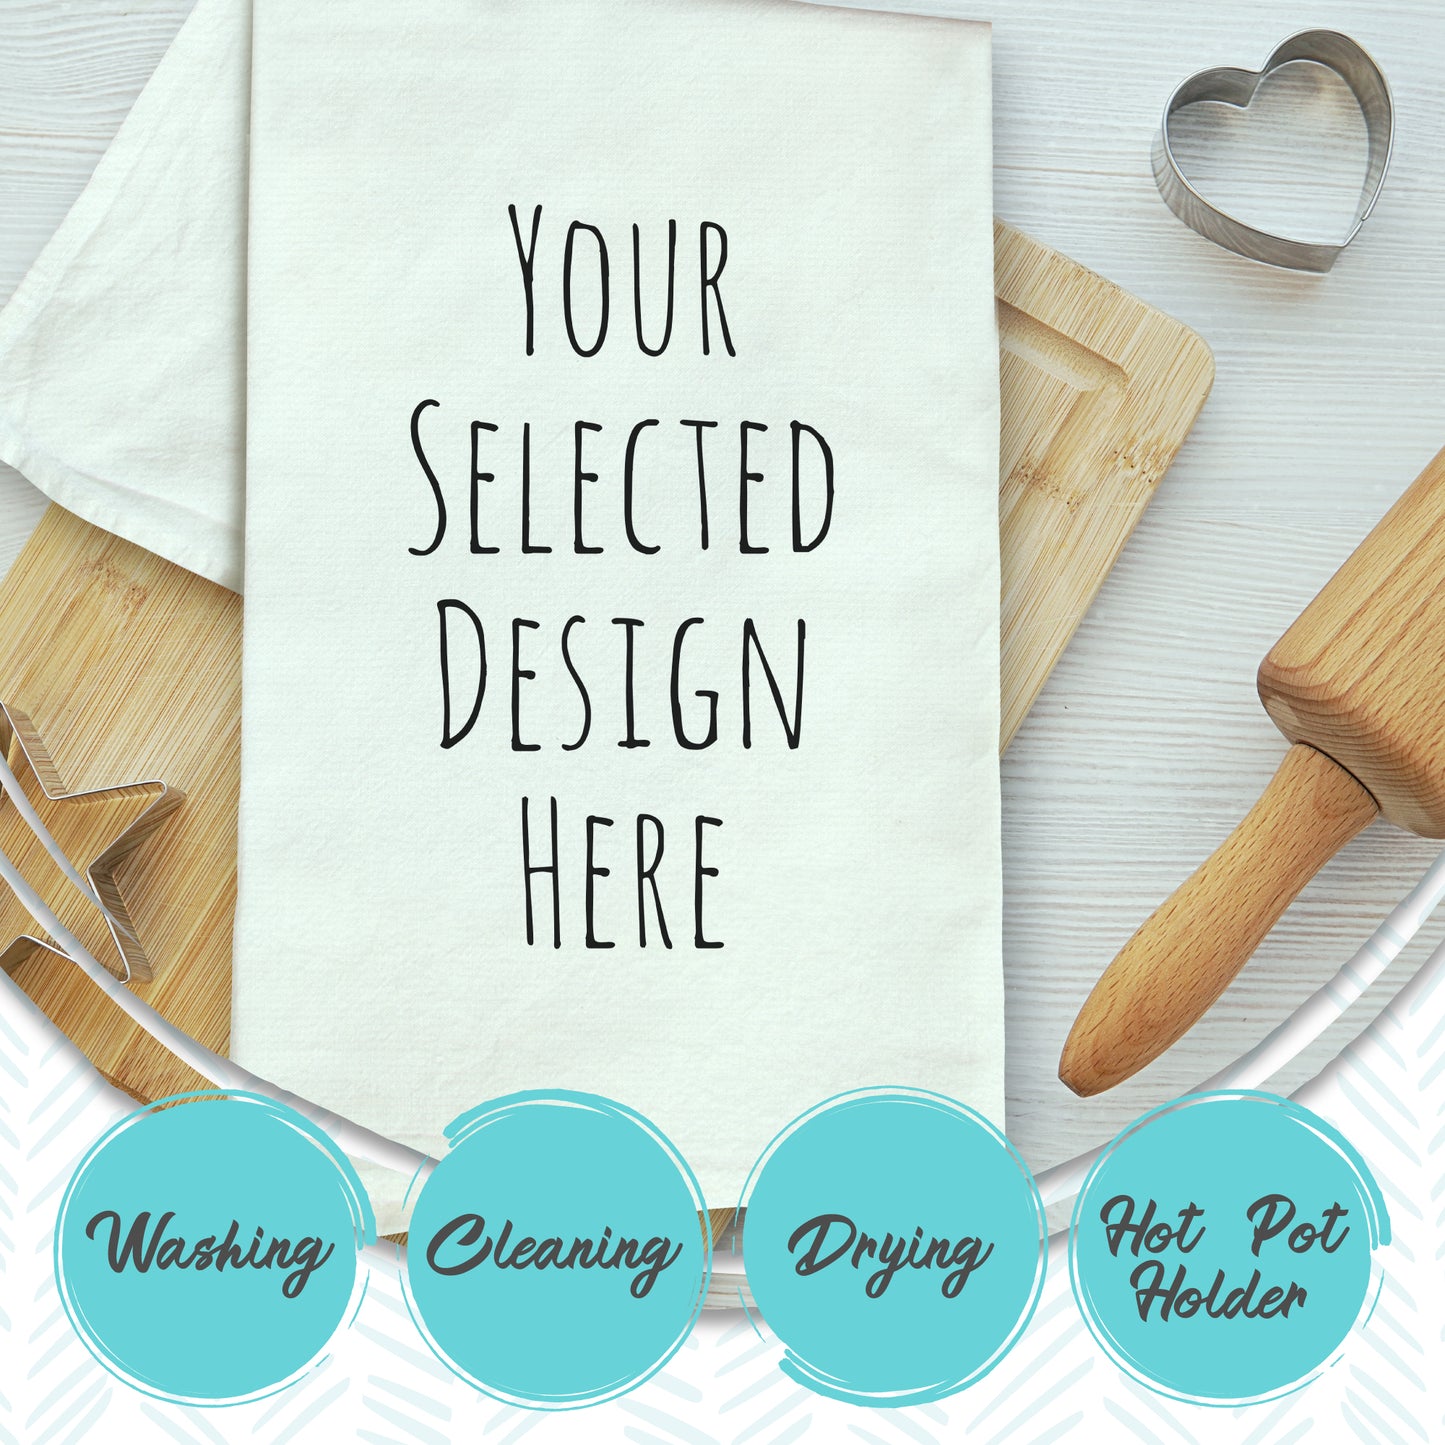 Queso The Mondays Dish Towel - White Or Gray - MoonlightMakers